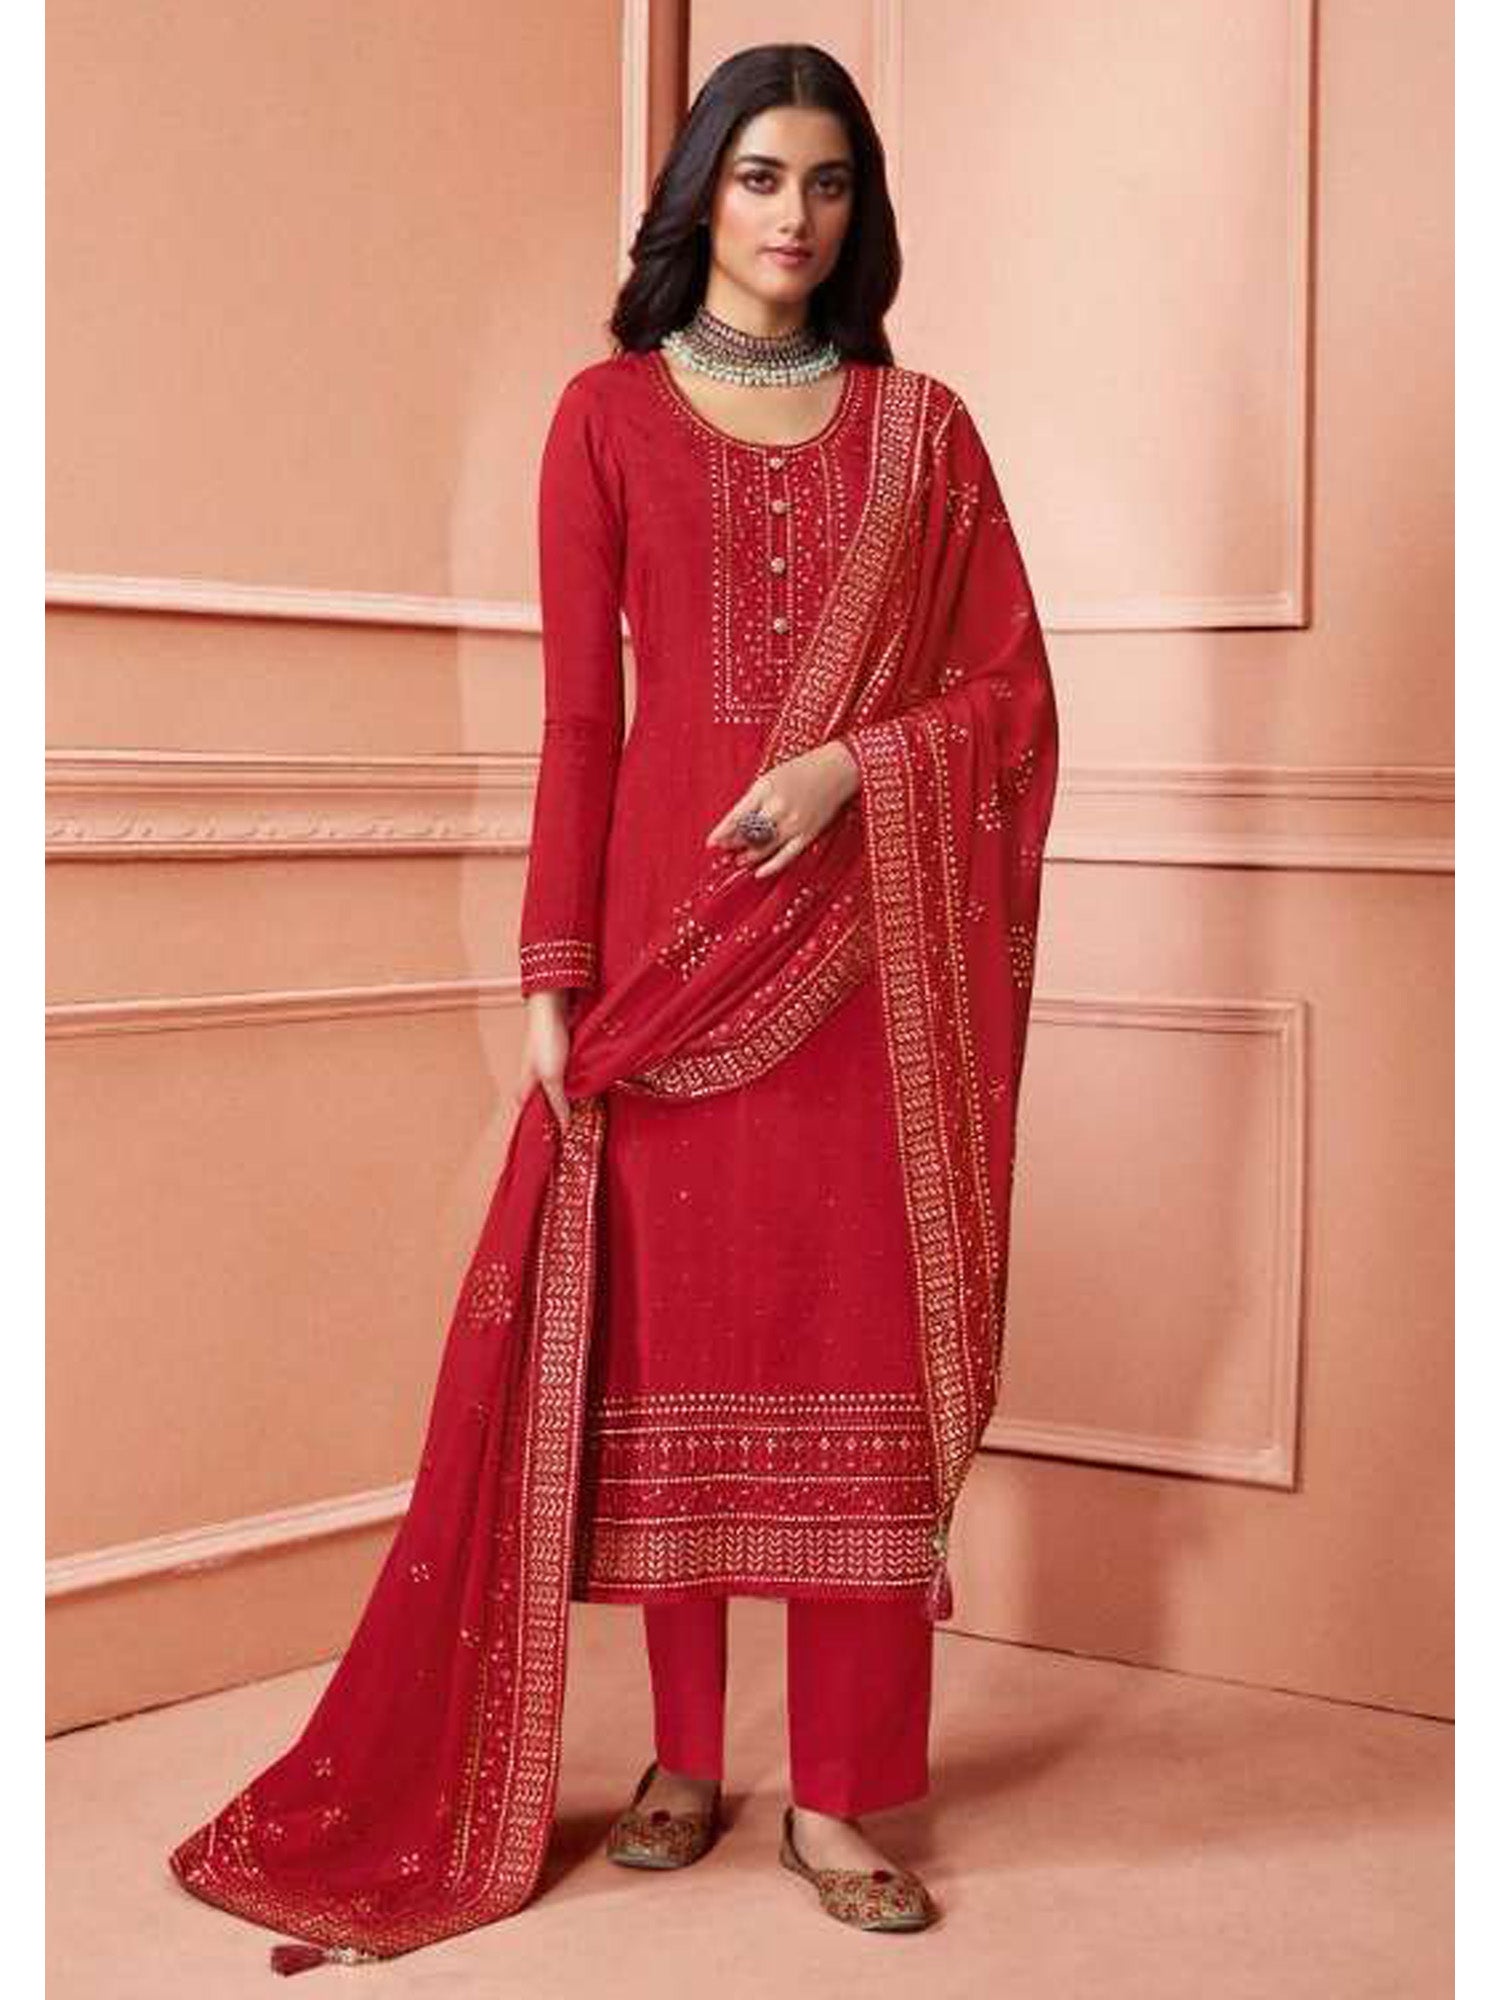 Women's Red Dola Silk Embroidered Salwar Suit - Fashion Forever